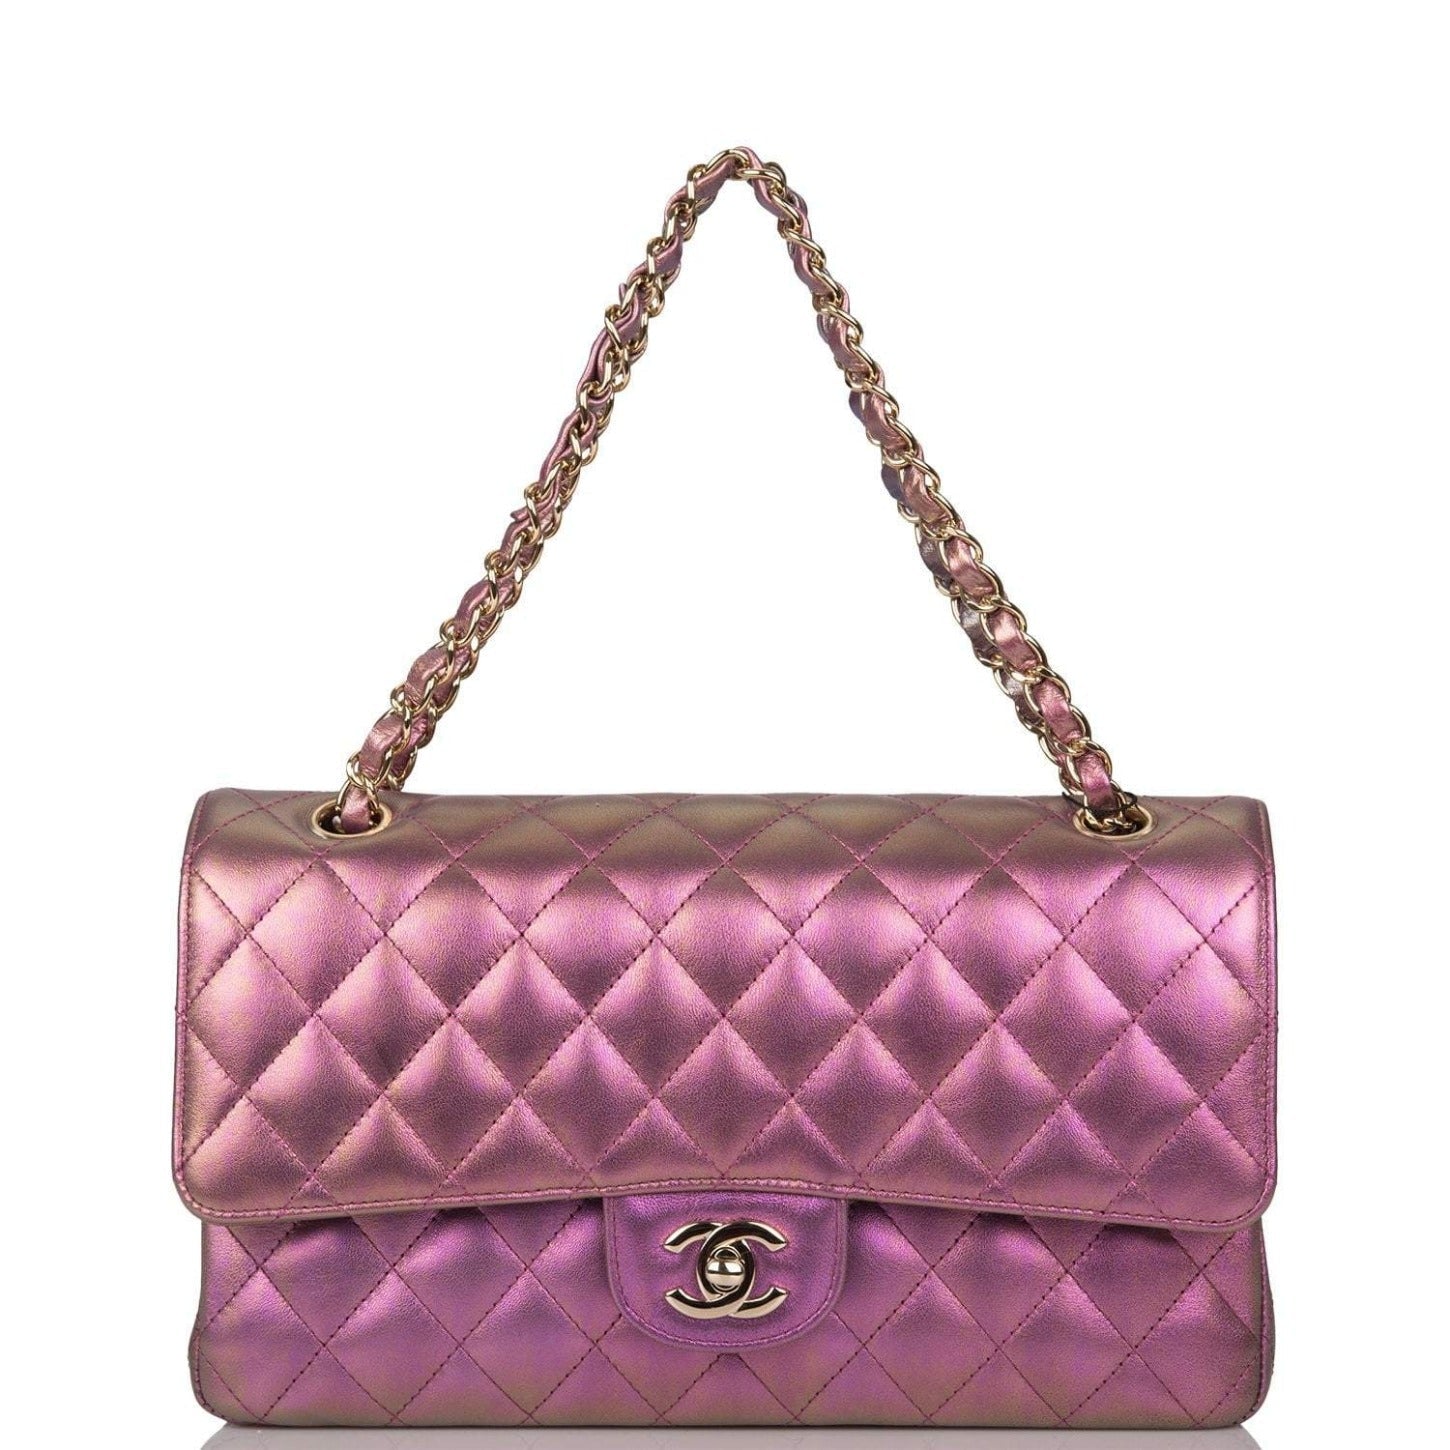 Chanel Purple Iridescent Quilted Lambskin Medium Classic Double Flap Bag Light Gold Hardware